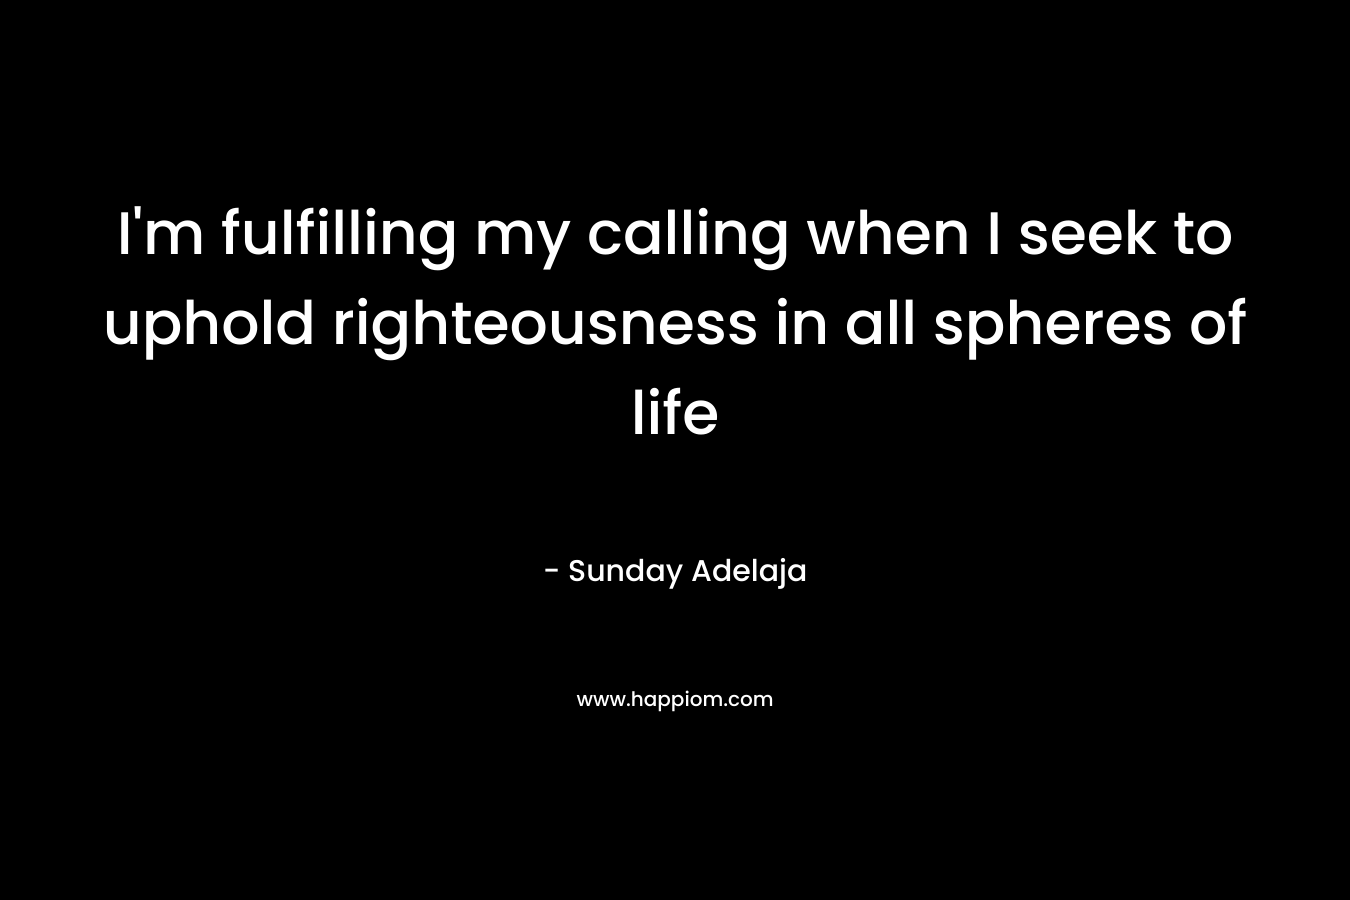 I’m fulfilling my calling when I seek to uphold righteousness in all spheres of life – Sunday Adelaja